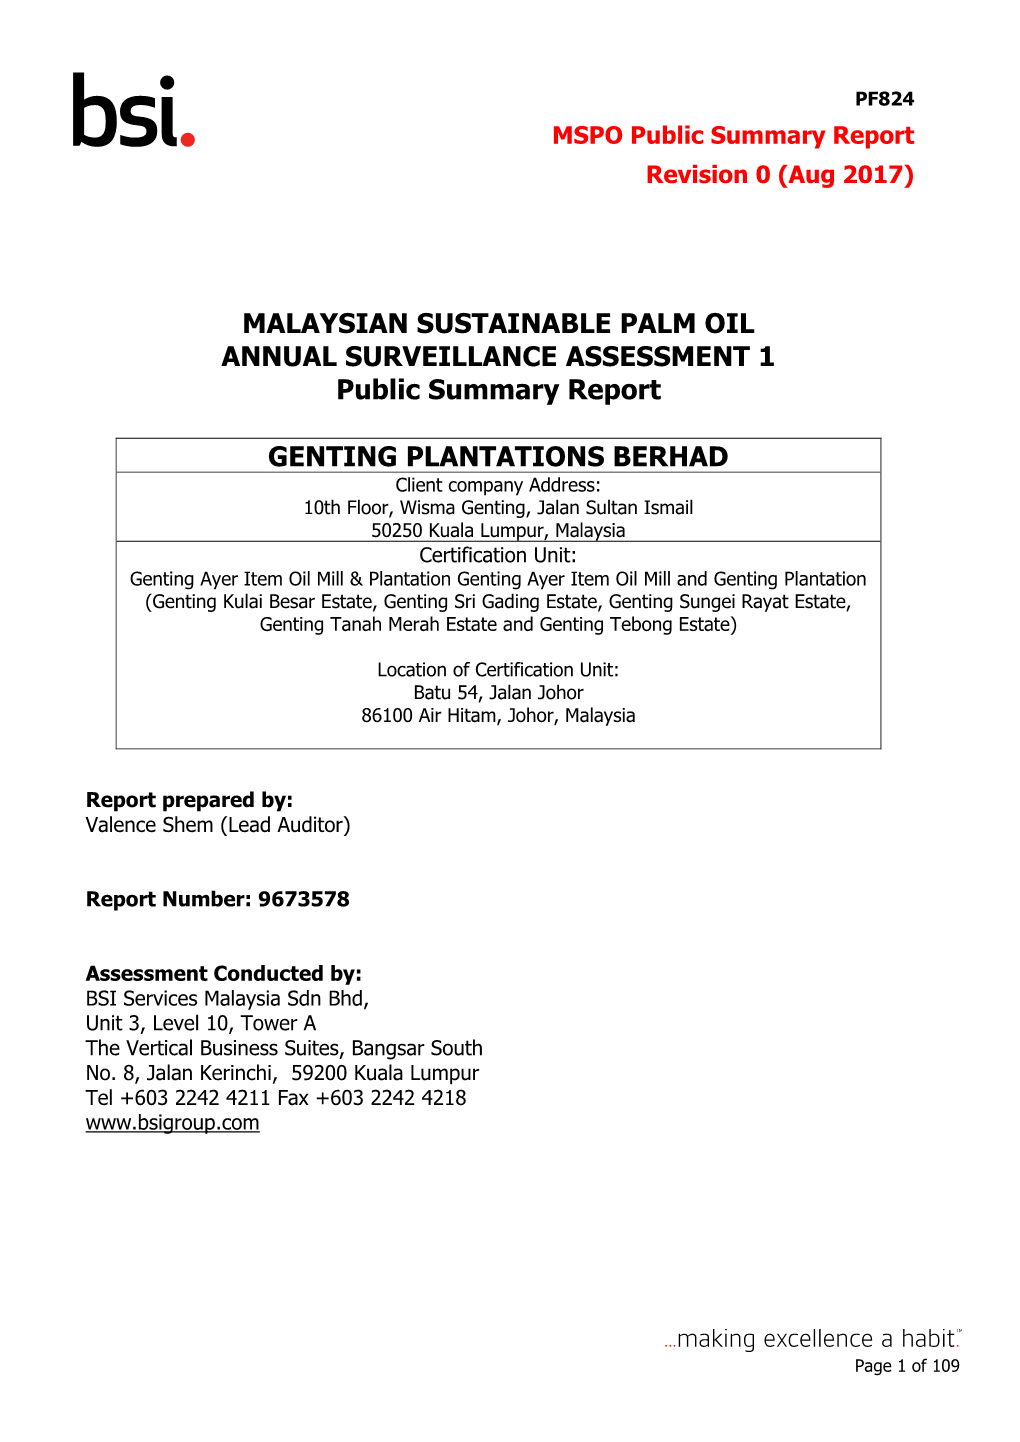 MALAYSIAN SUSTAINABLE PALM OIL ANNUAL SURVEILLANCE ASSESSMENT 1 Public Summary Report GENTING PLANTATIONS BERHAD